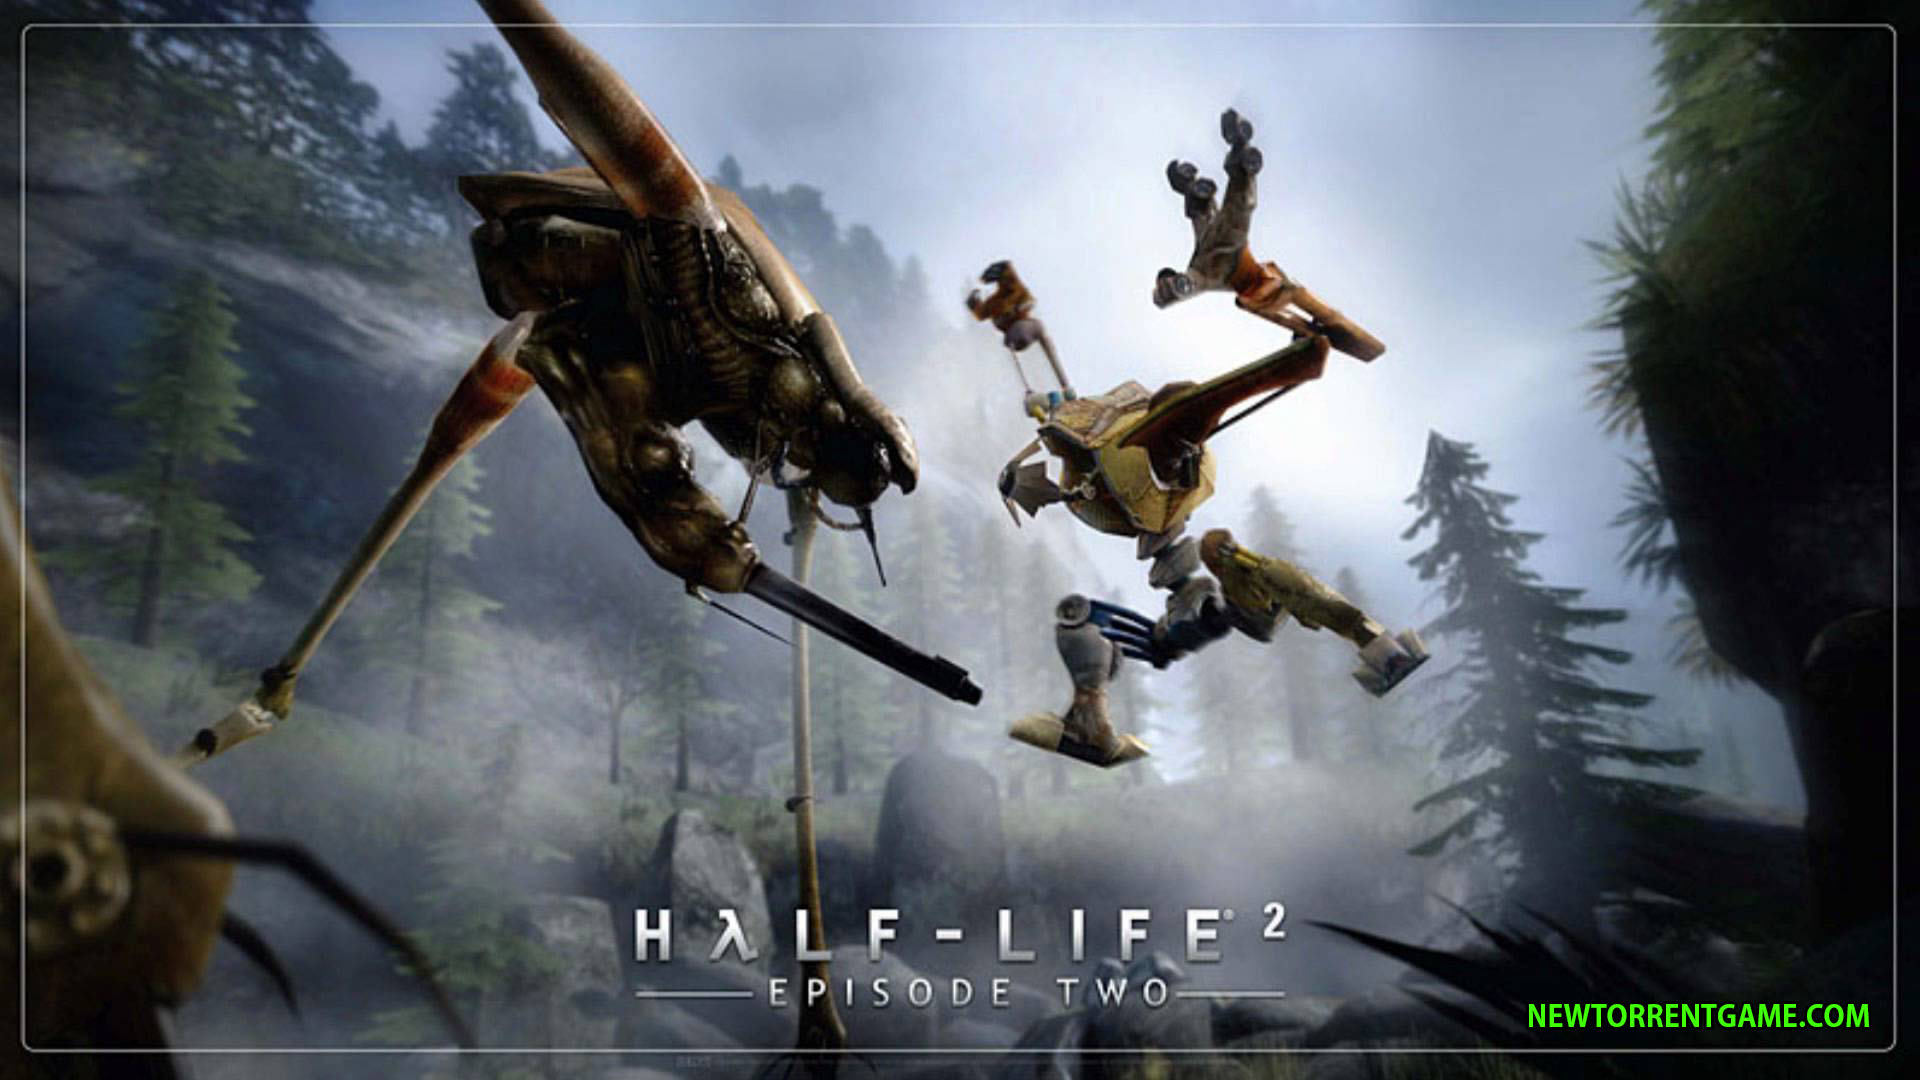 half-life-2-episode-3-pc-download-torrent-perfectlifestyle-info-news-for-a-perfect-life